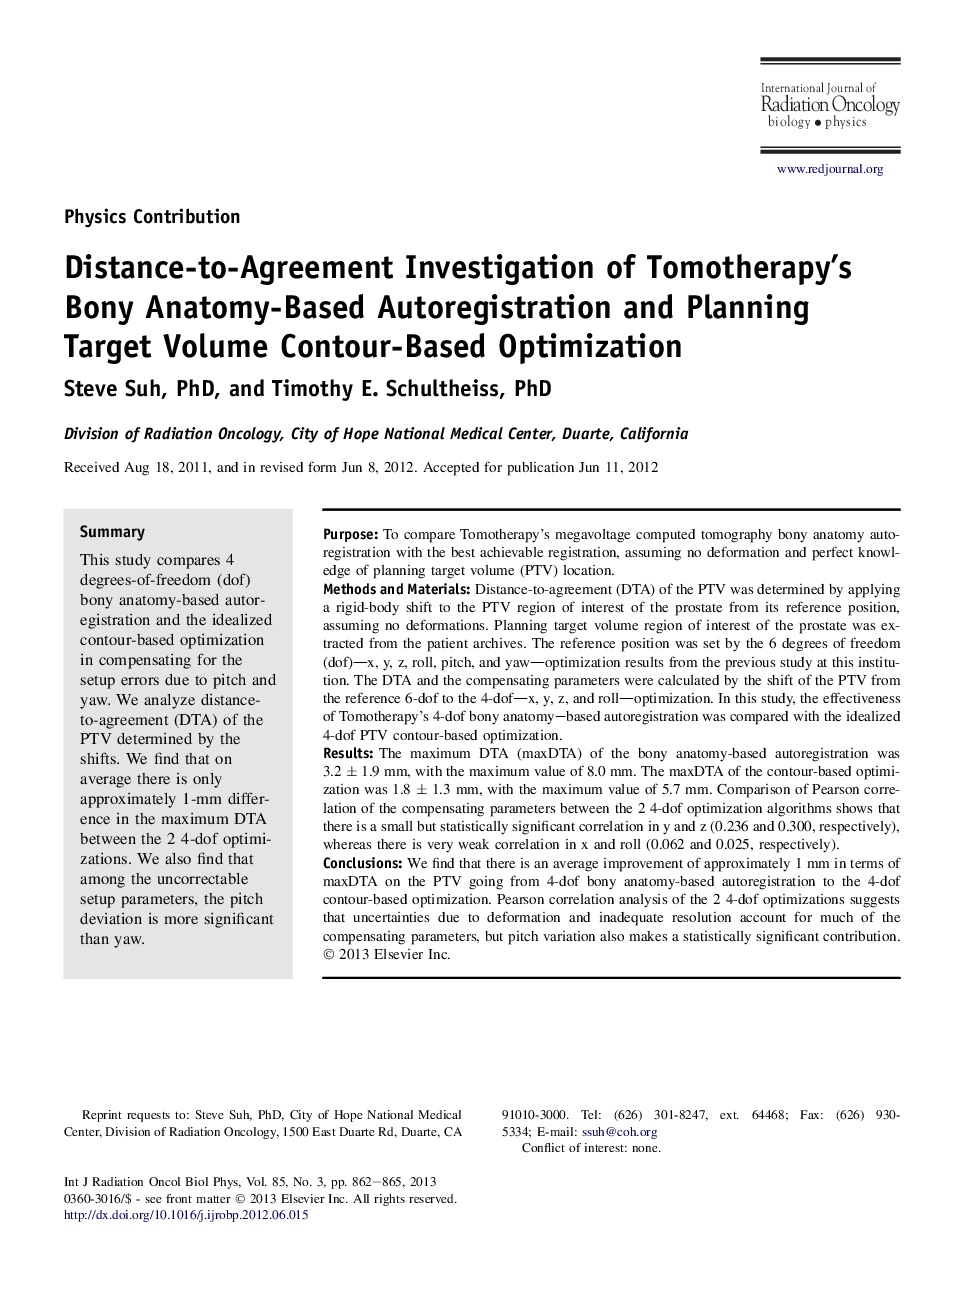 Distance-to-Agreement Investigation of Tomotherapy's Bony Anatomy-Based Autoregistration and Planning Target Volume Contour-Based Optimization